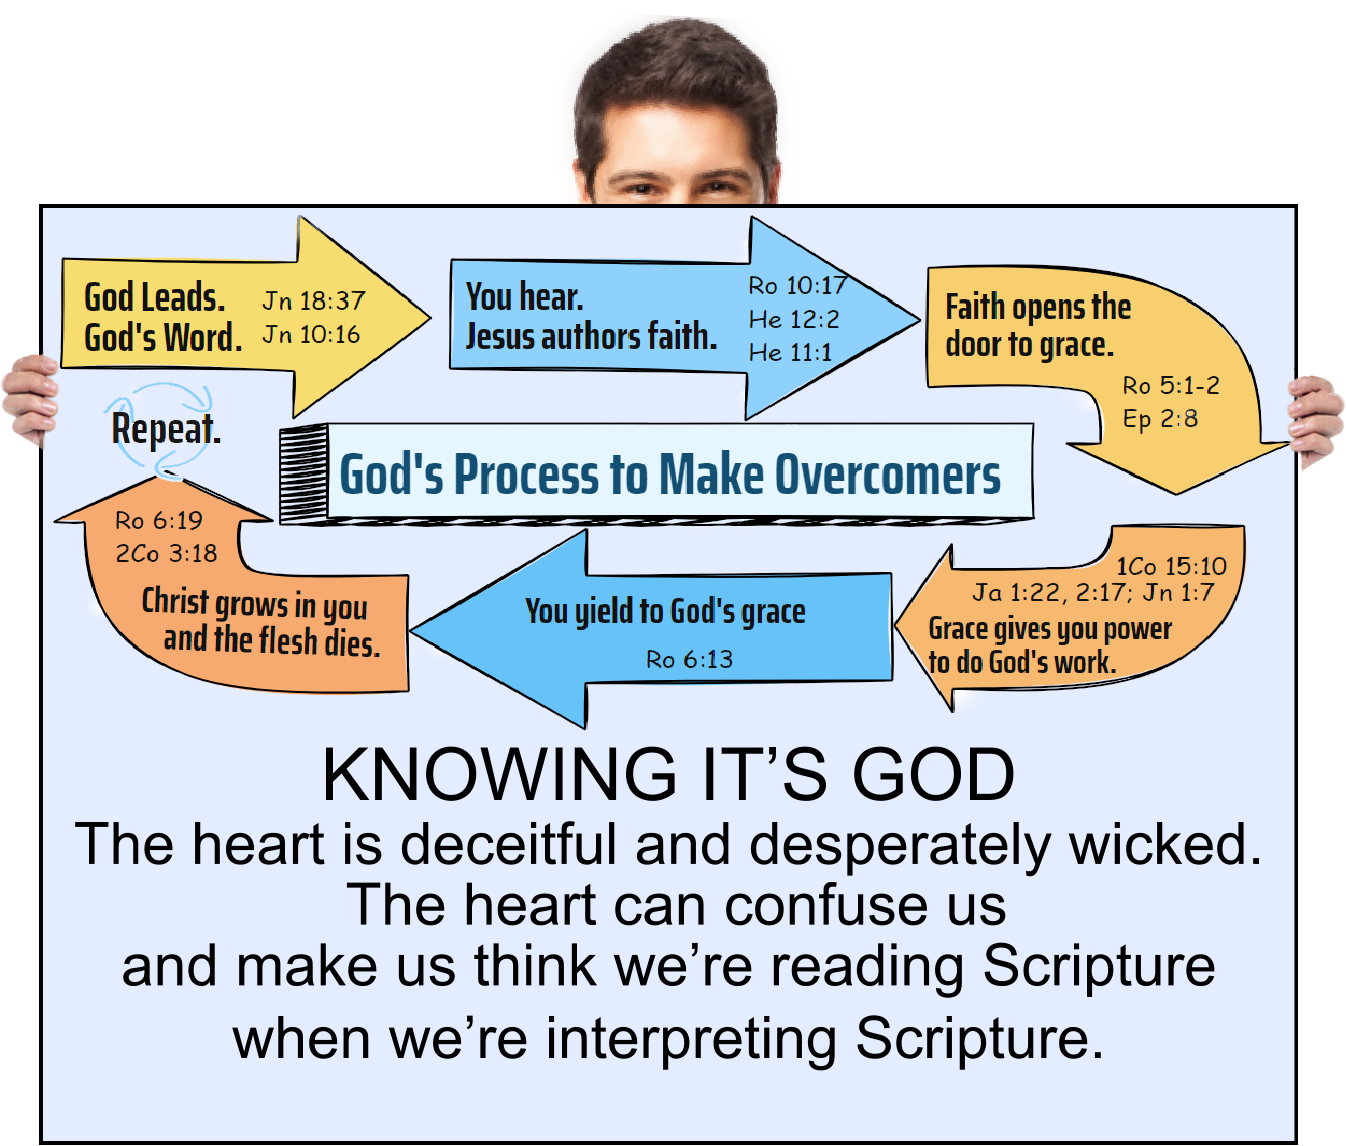 God speaks through the Bible, but the heart is deceitful and desperately wicked. The heart can confuse us and make us think we’re reading Scripture when we’re interpreting Scripture. 